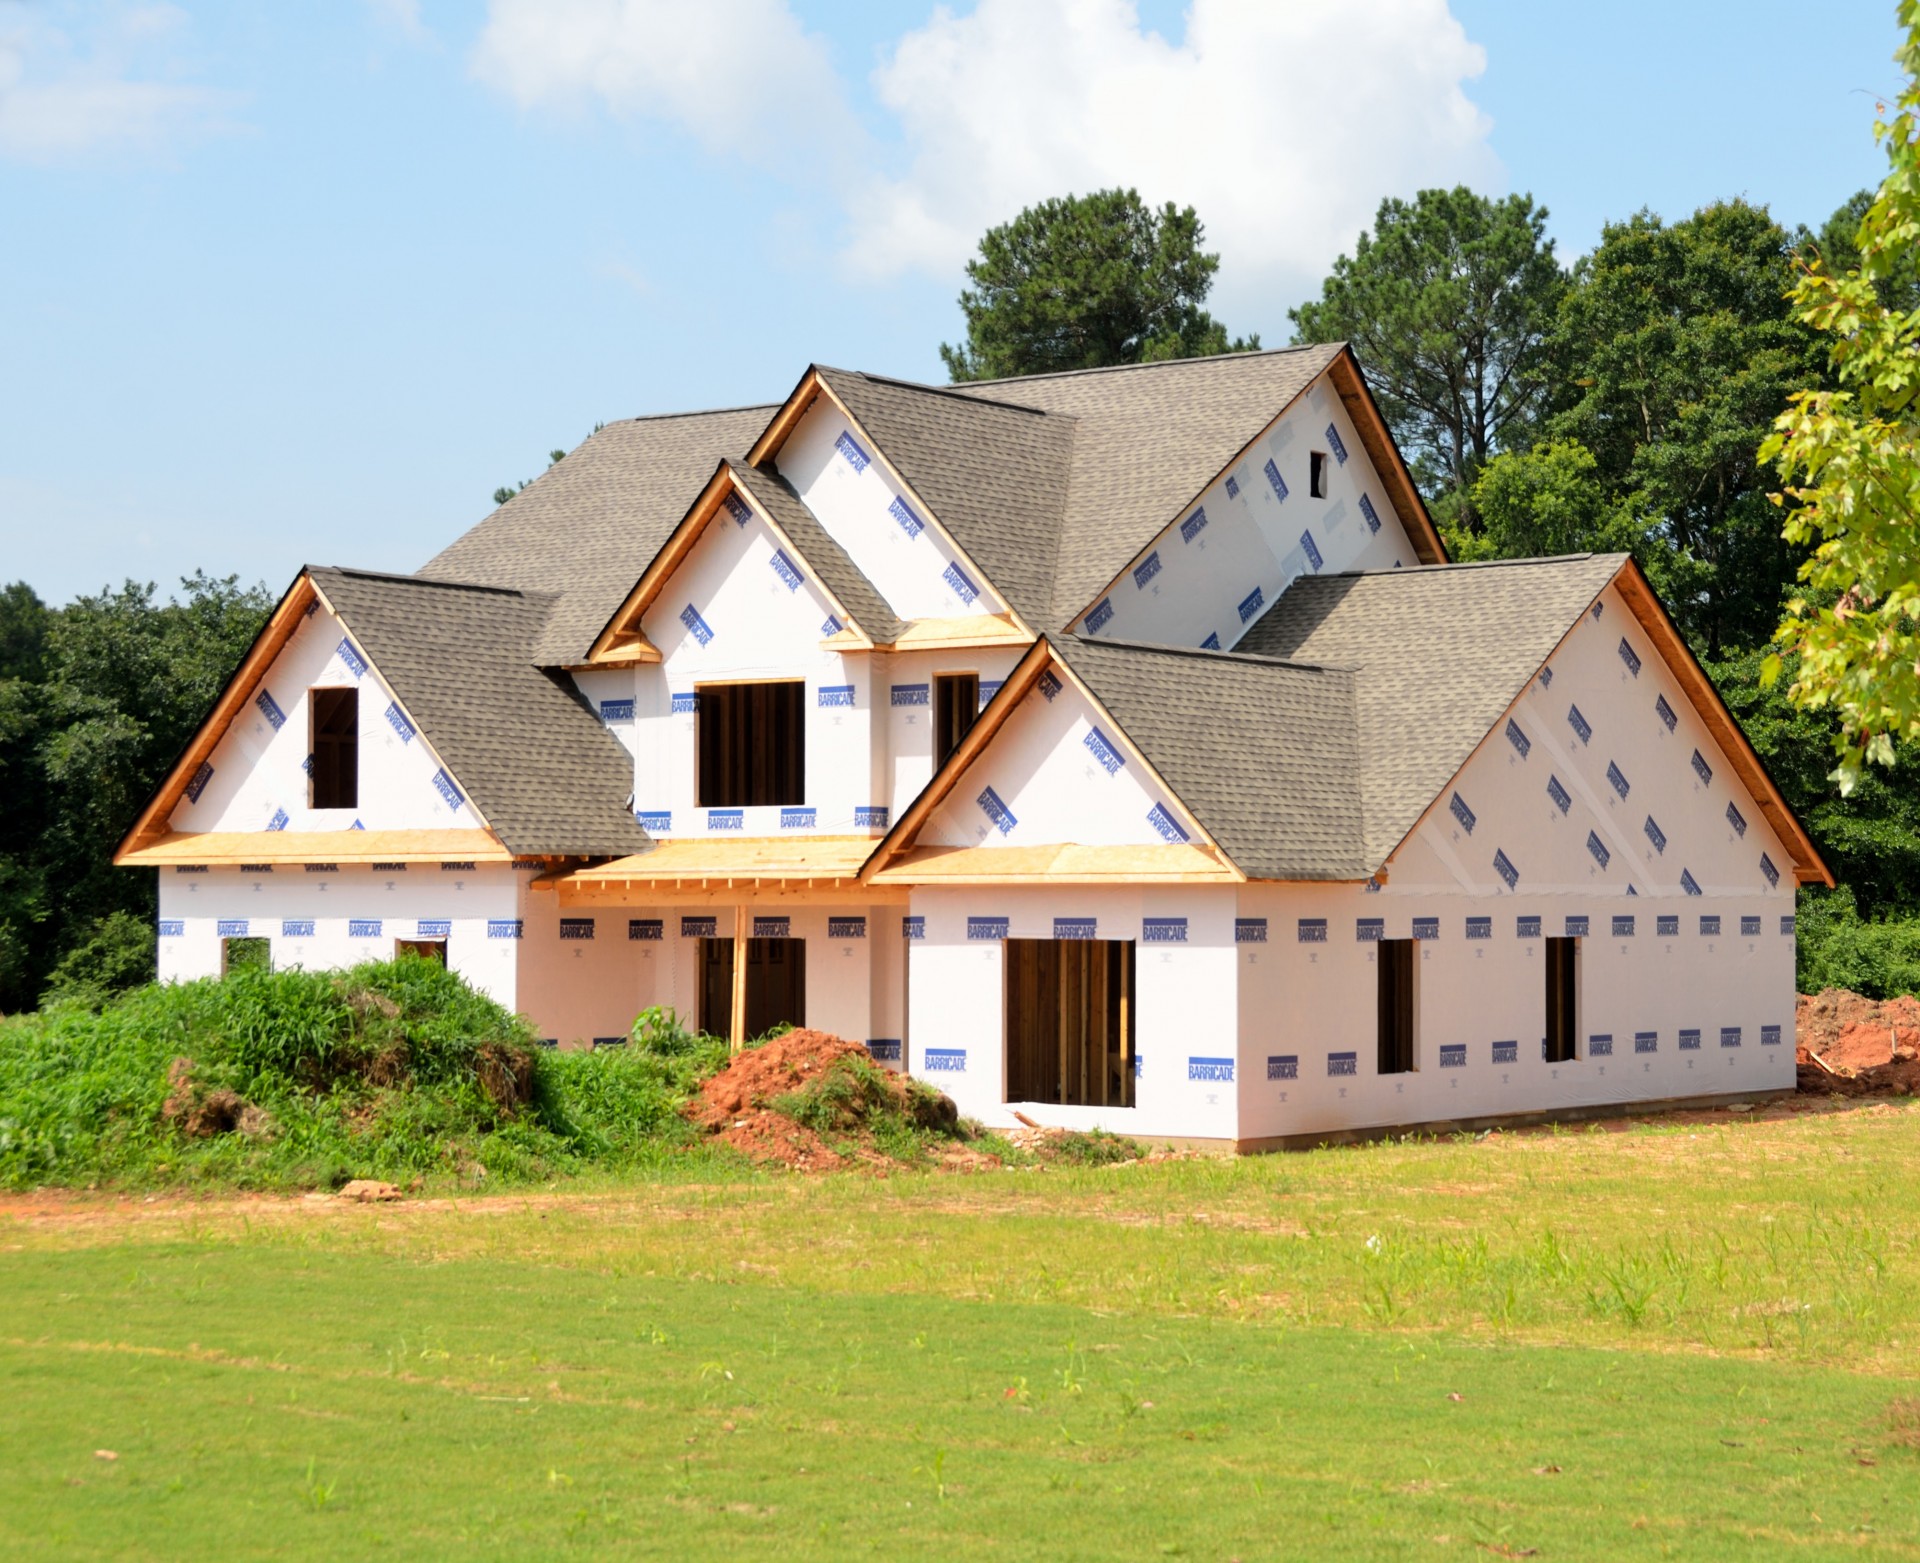 new-home-construction-free-stock-photo-public-domain-pictures